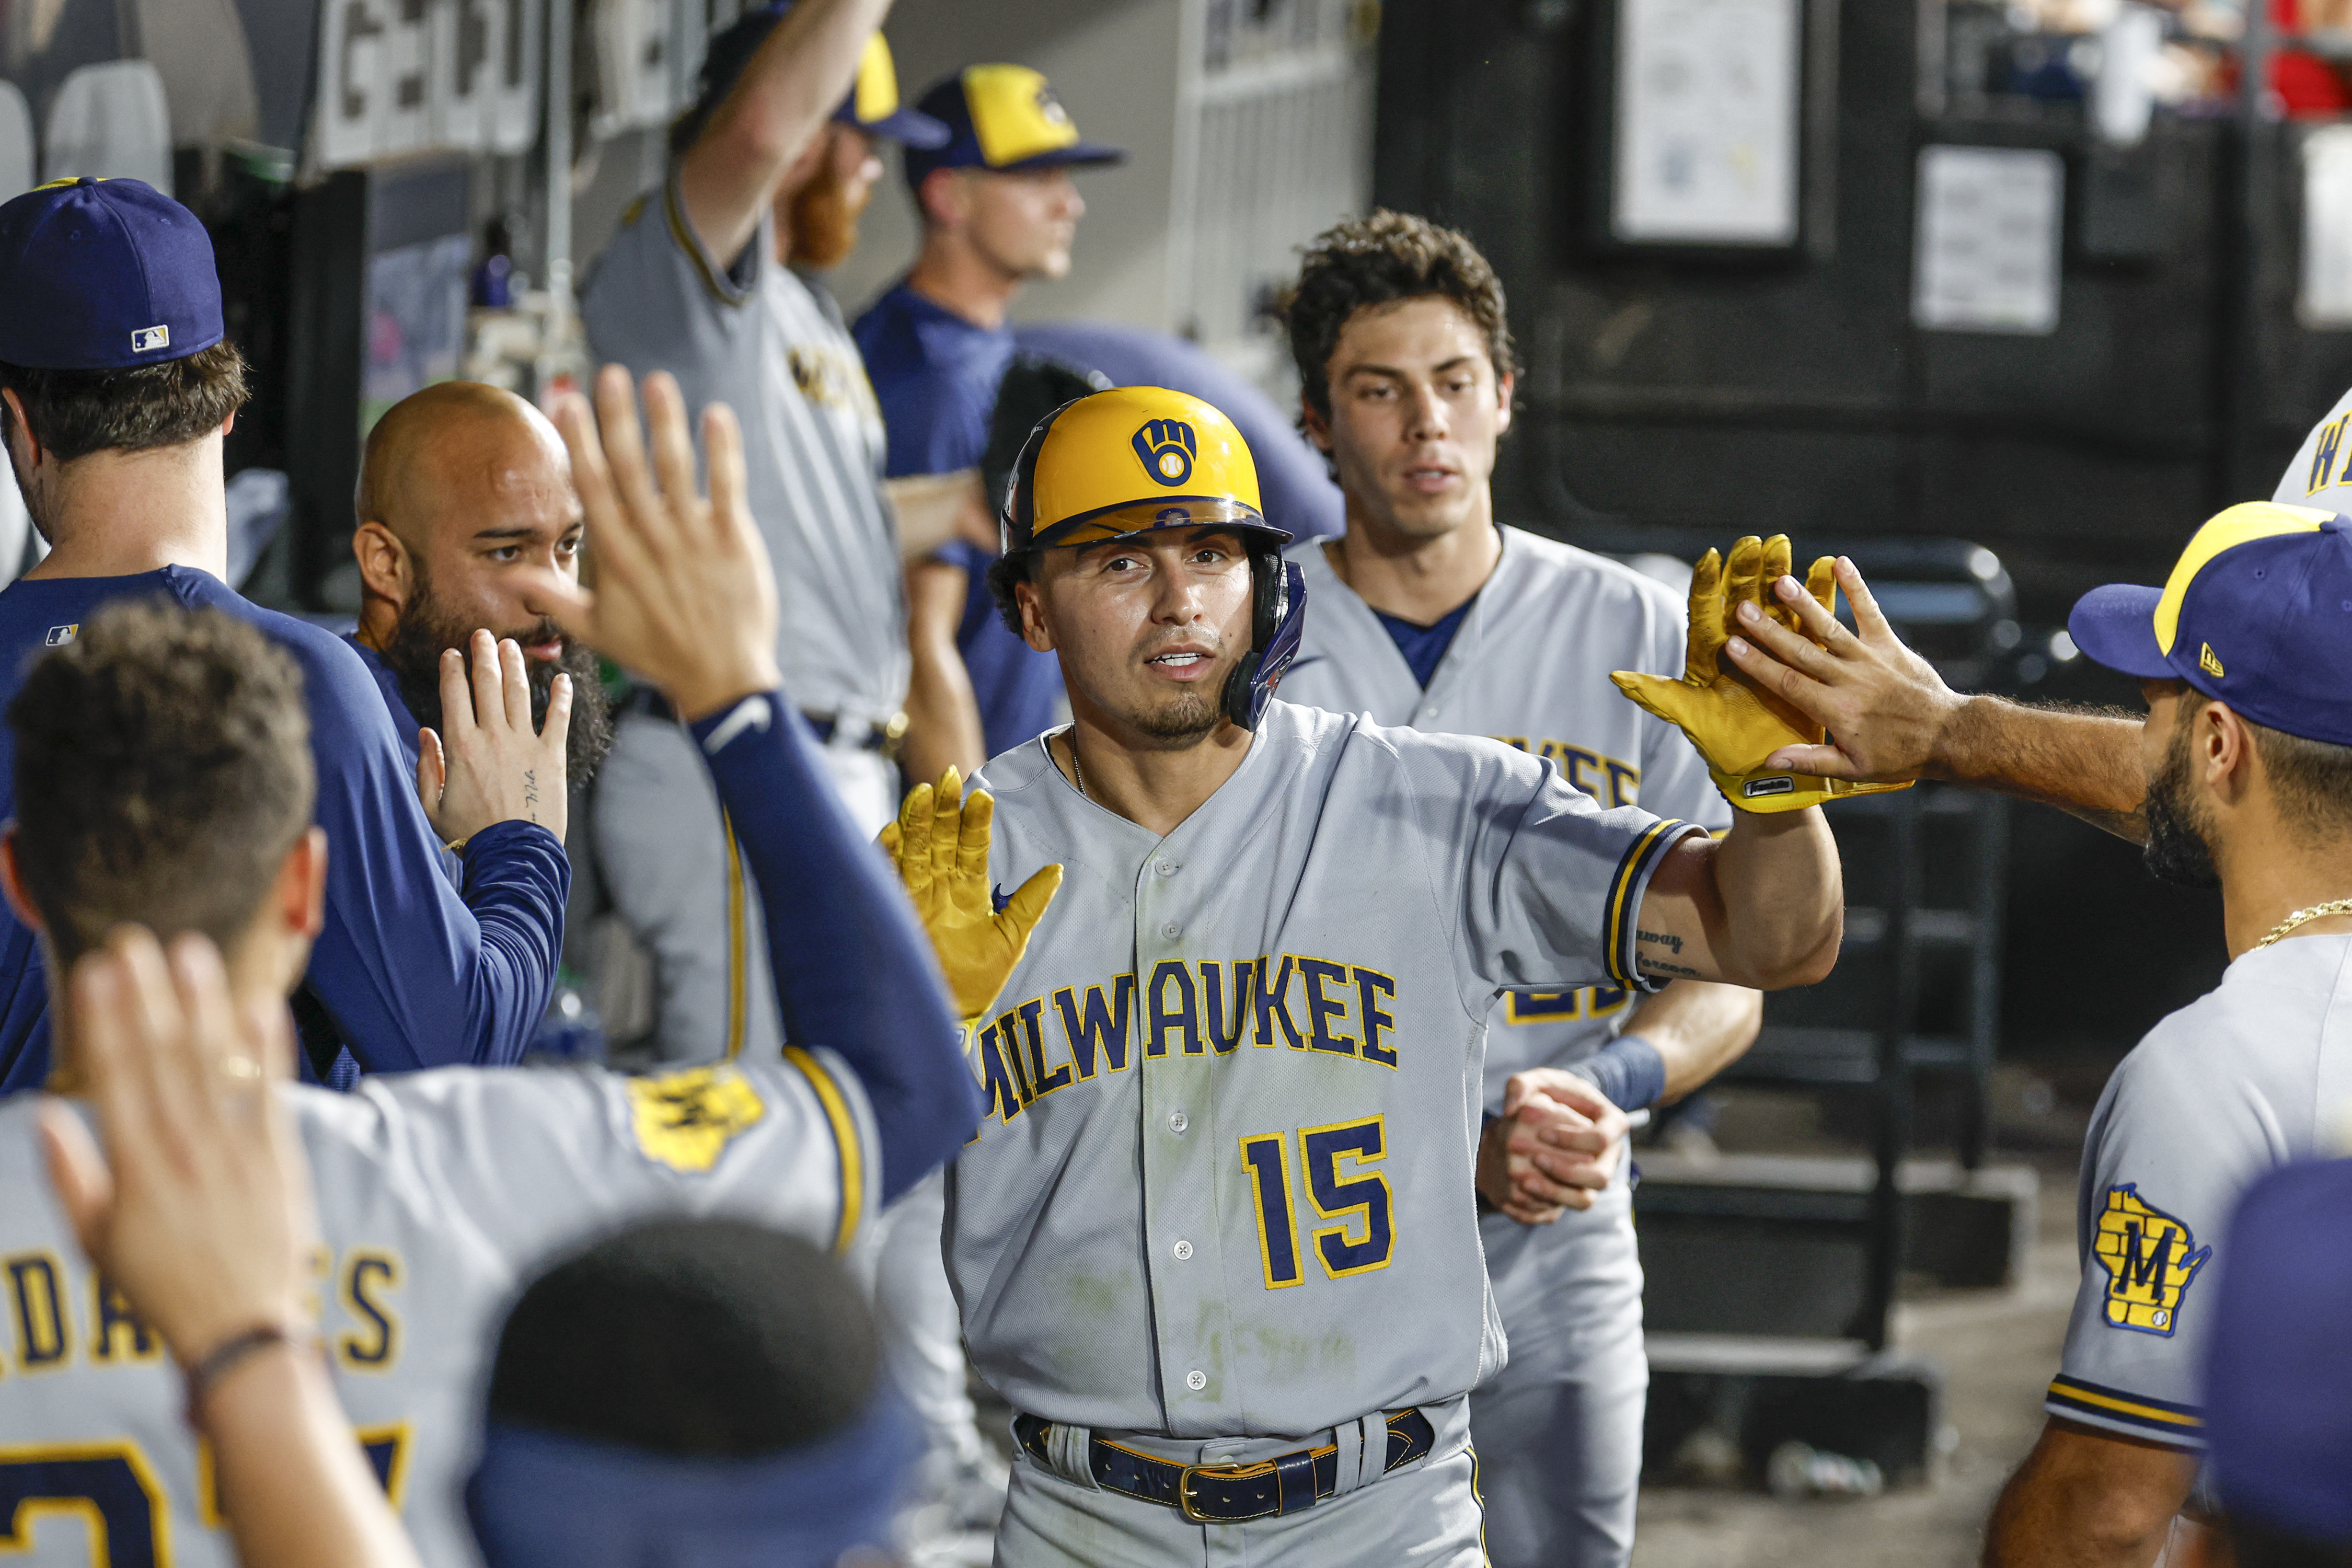 Brewers rally late for 3-2 win over White Sox